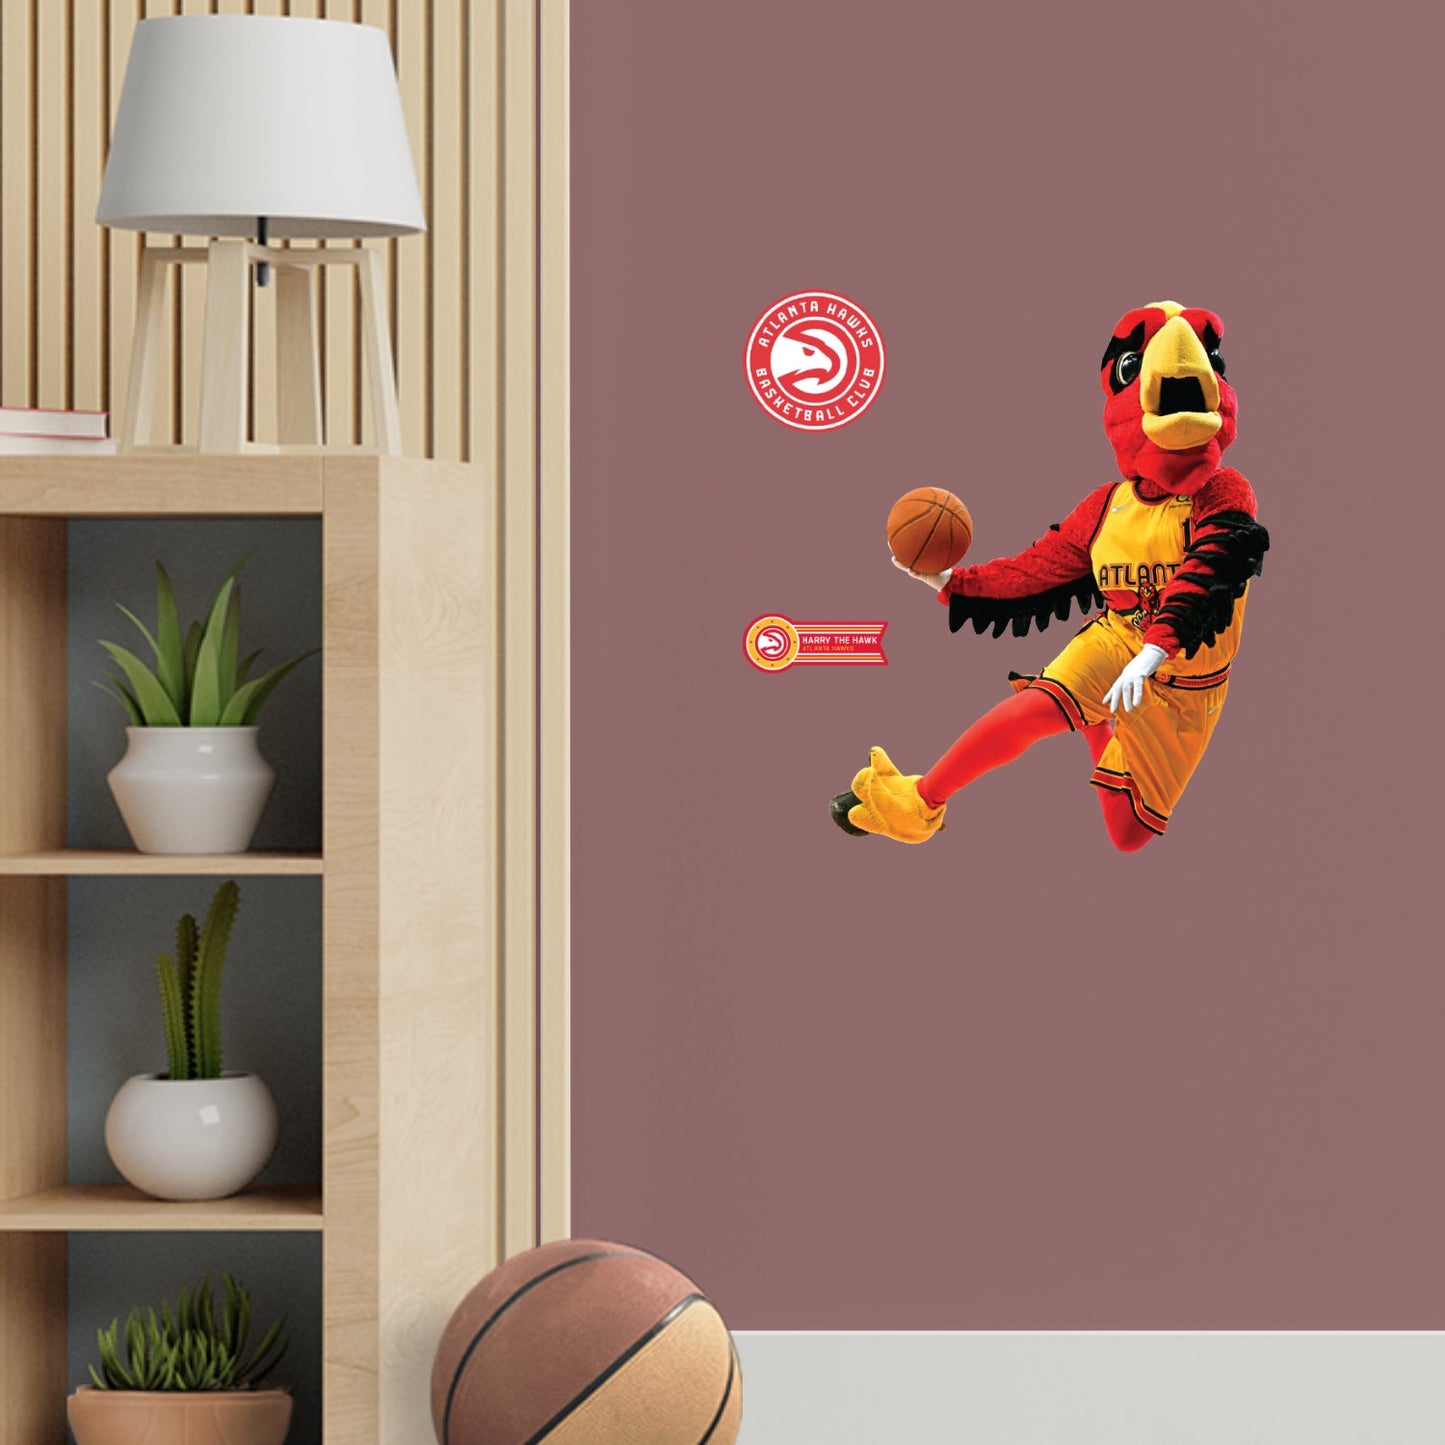 Atlanta Hawks: Harry the Hawk Mascot - Officially Licensed NBA Removable Adhesive Decal